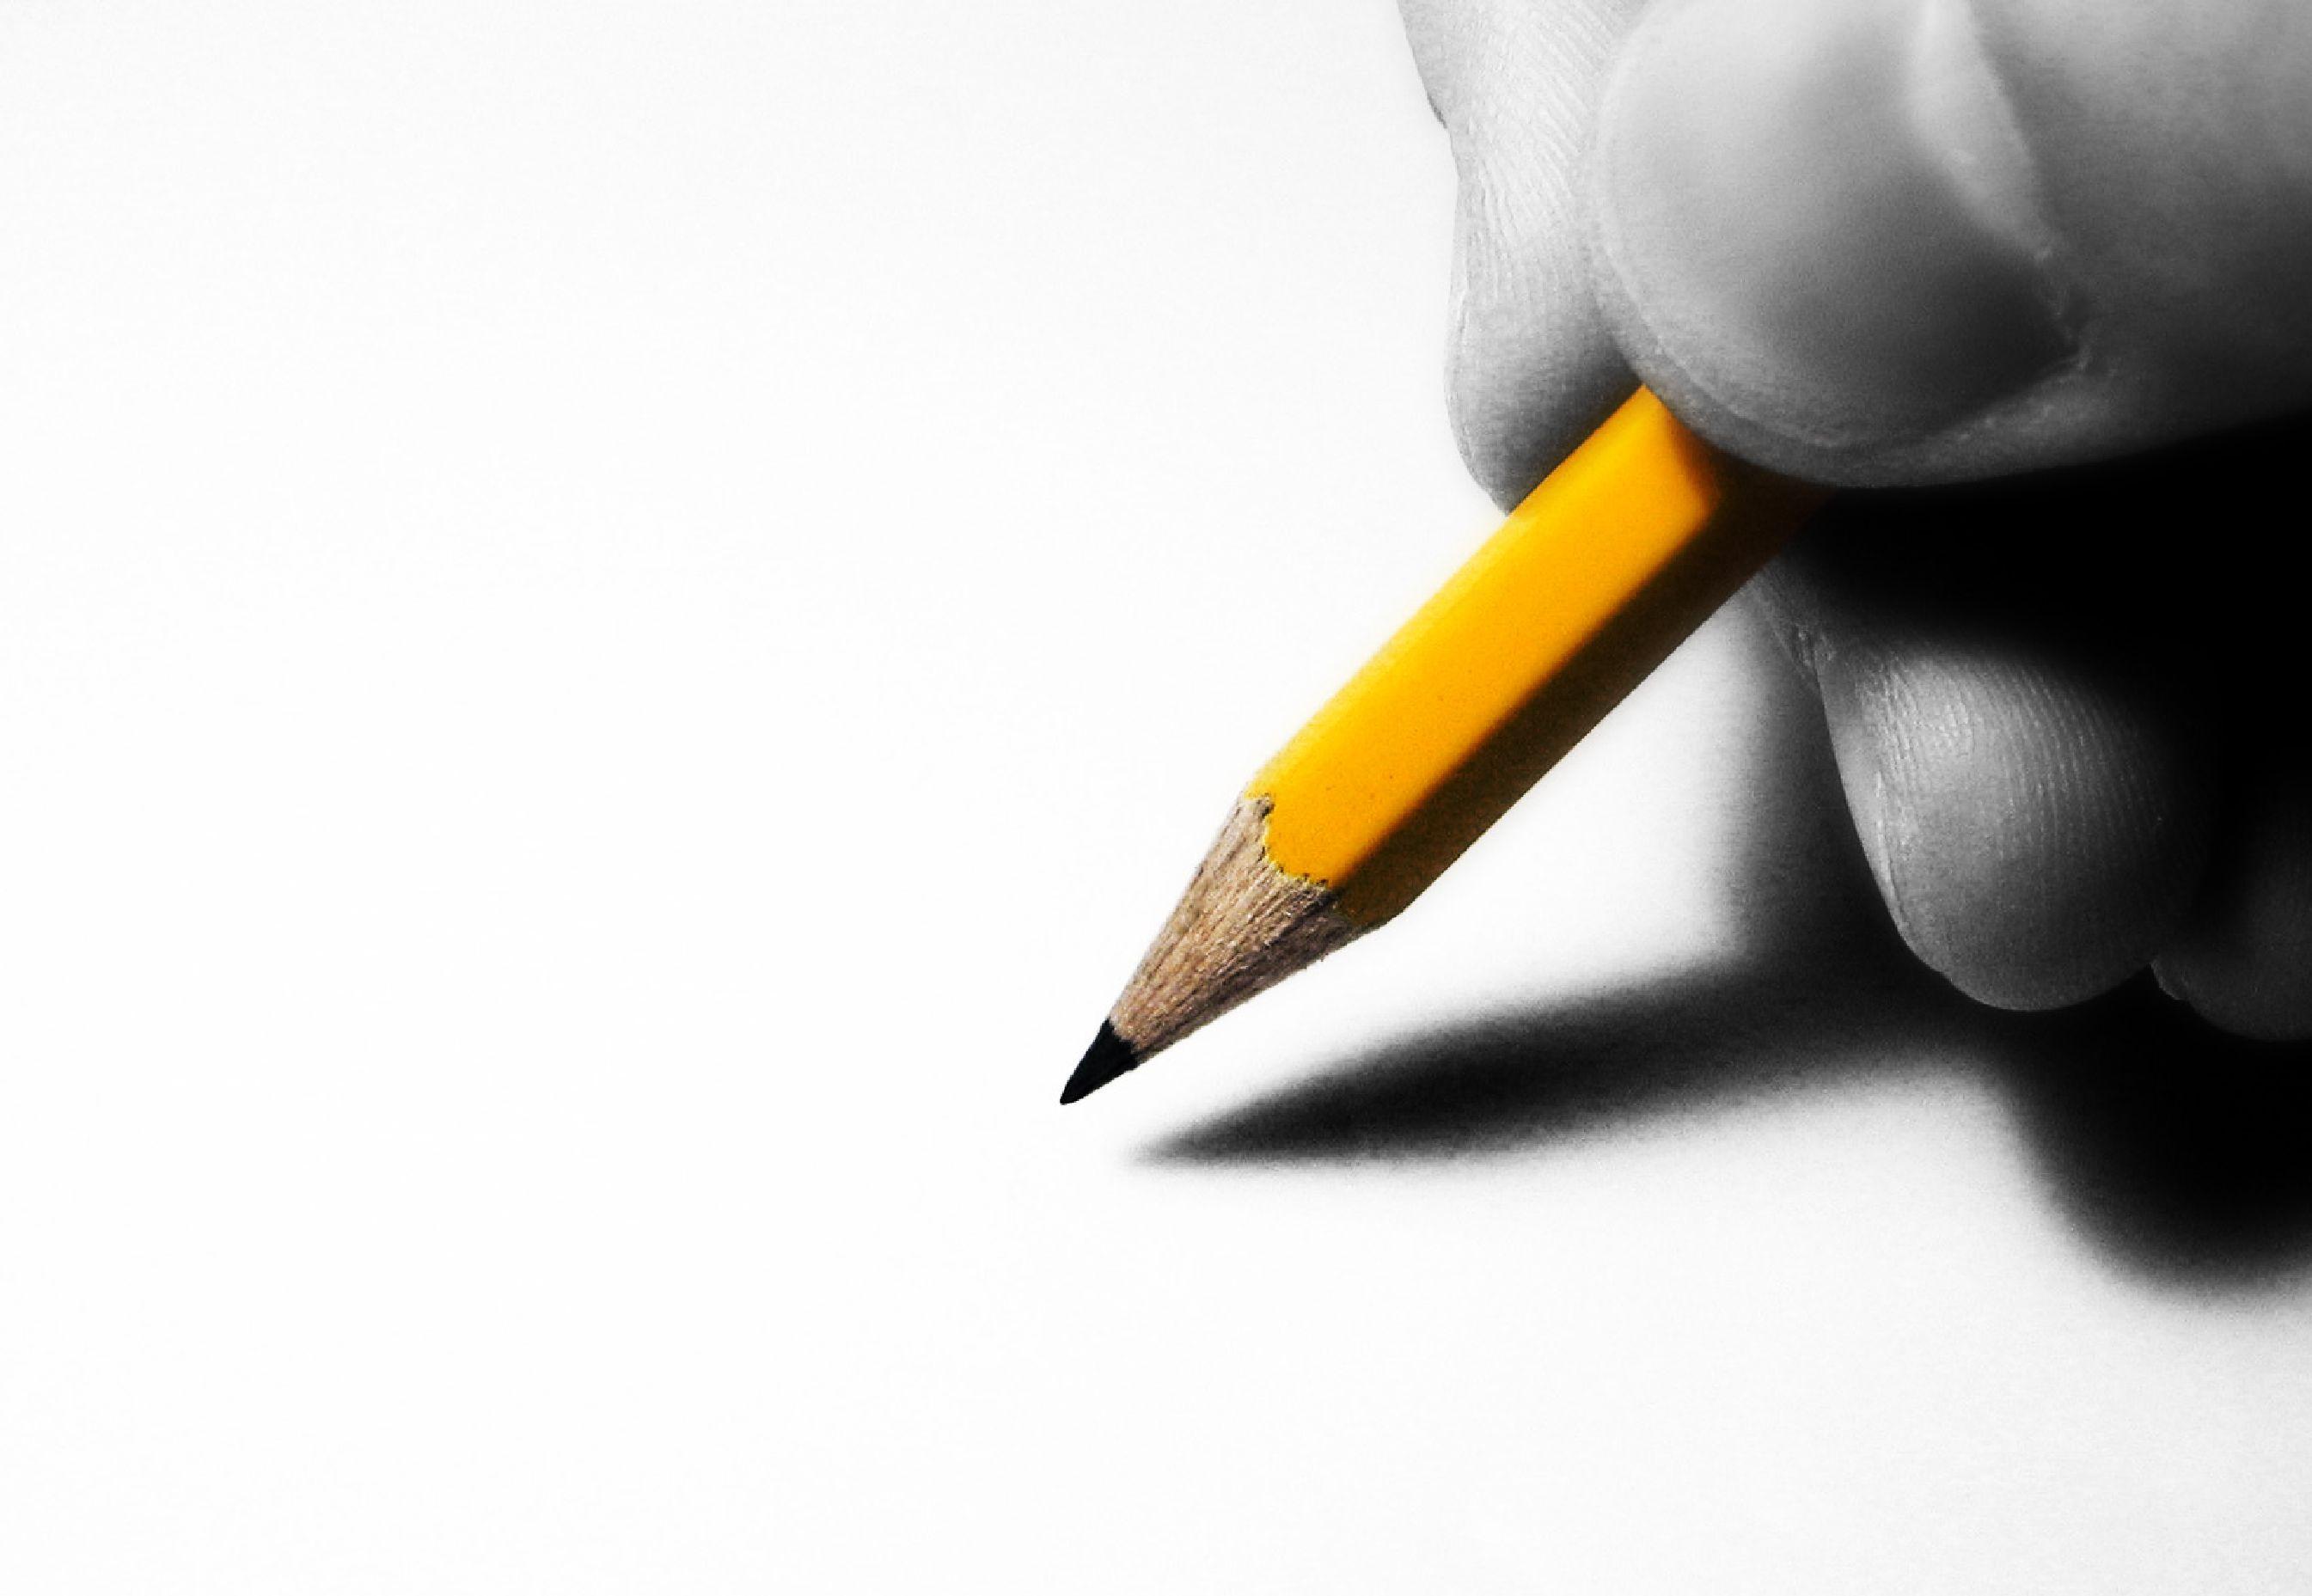 stock image of a pencil held near paper